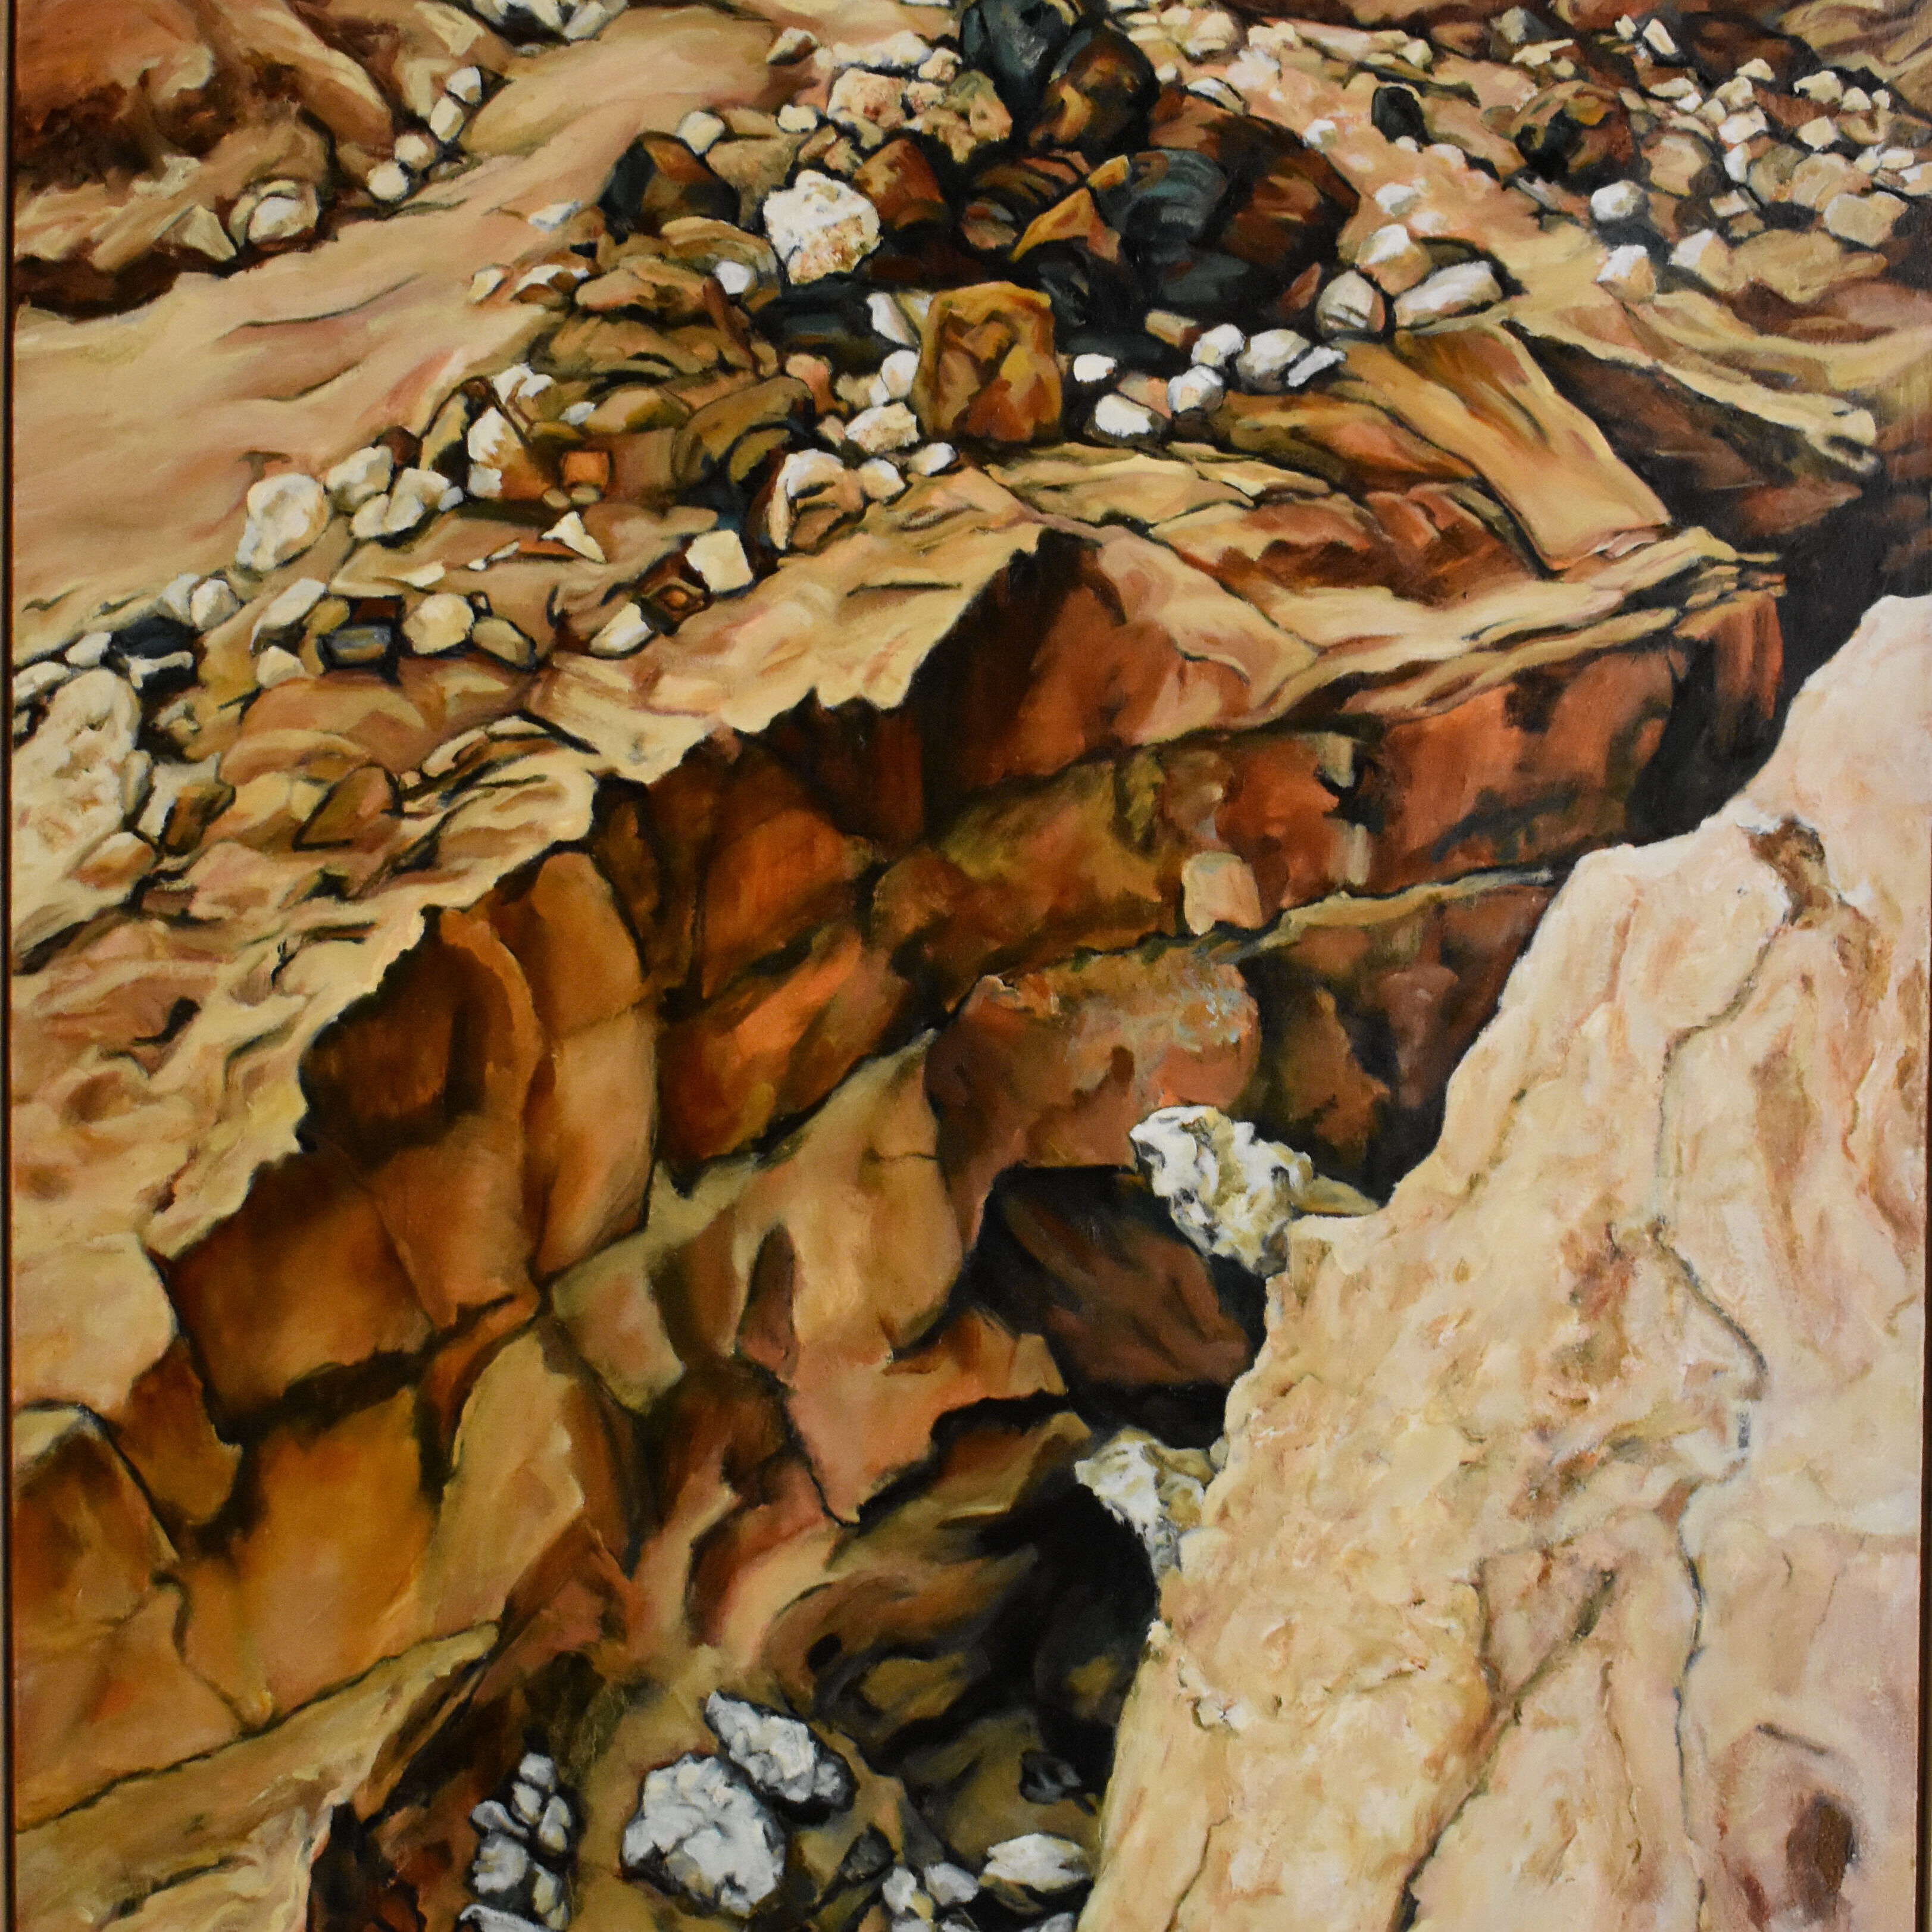 7. 'Fissure' oil on canvas 140cm x 100cm